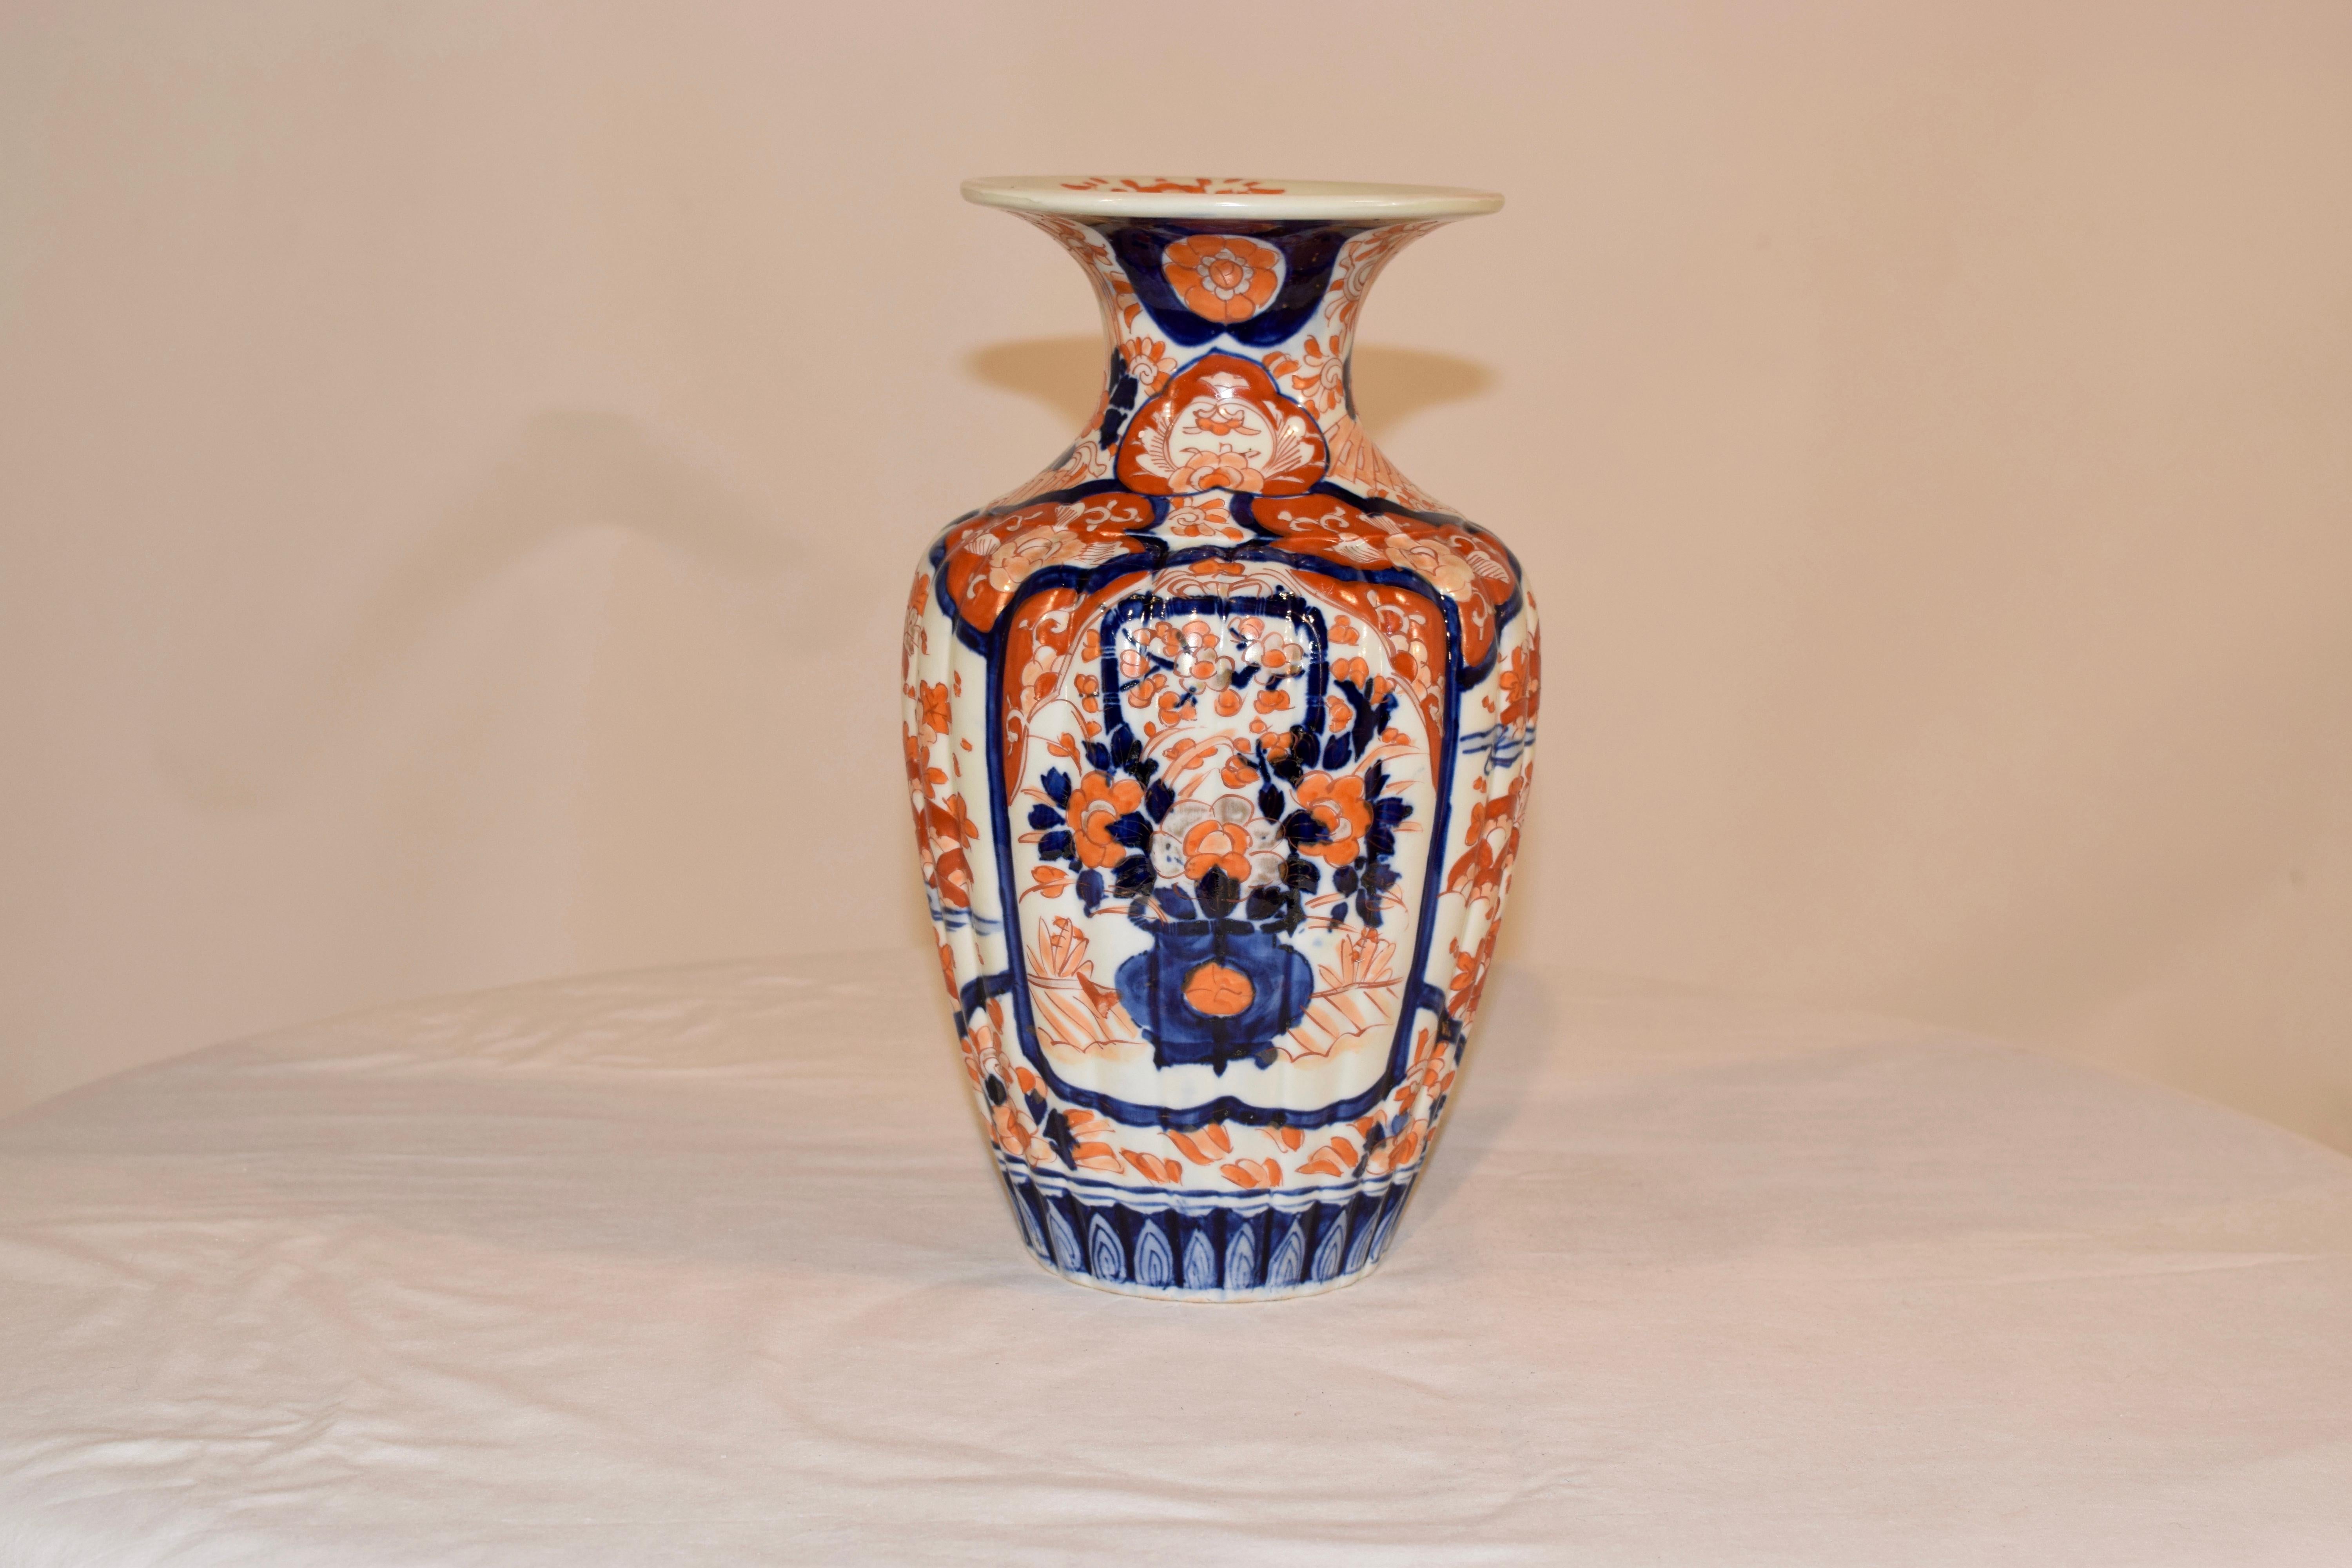 19th century Imari vase with two central medallions, one on each side, with beautiful hand painted decorations of garden scenes with urns and flowers, and two sides decorated with hand painted garden scenes. The vase itself is ribbed, which gives it